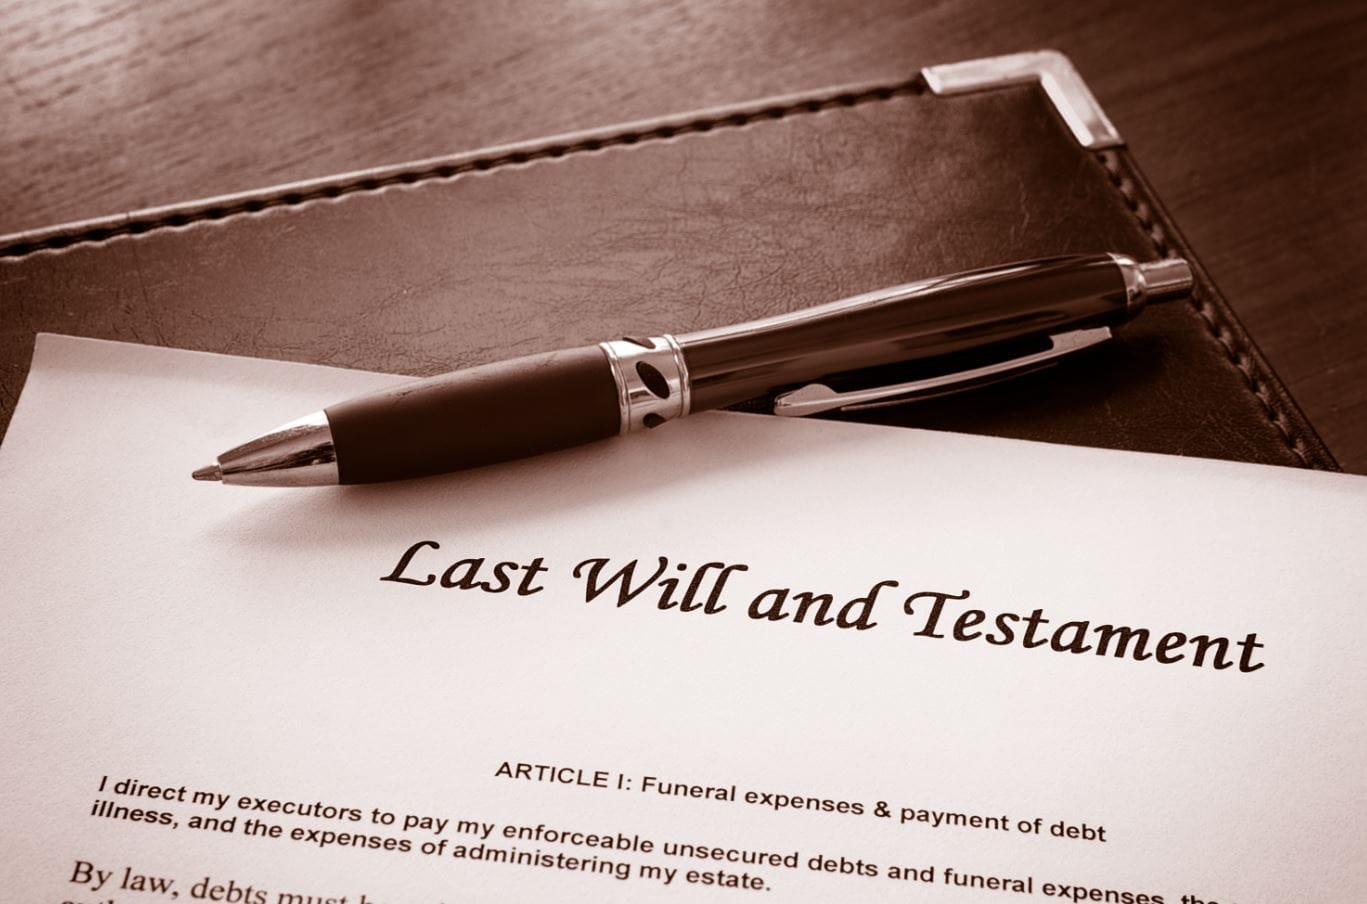 Problems for Your Family by Not Leaving a Will